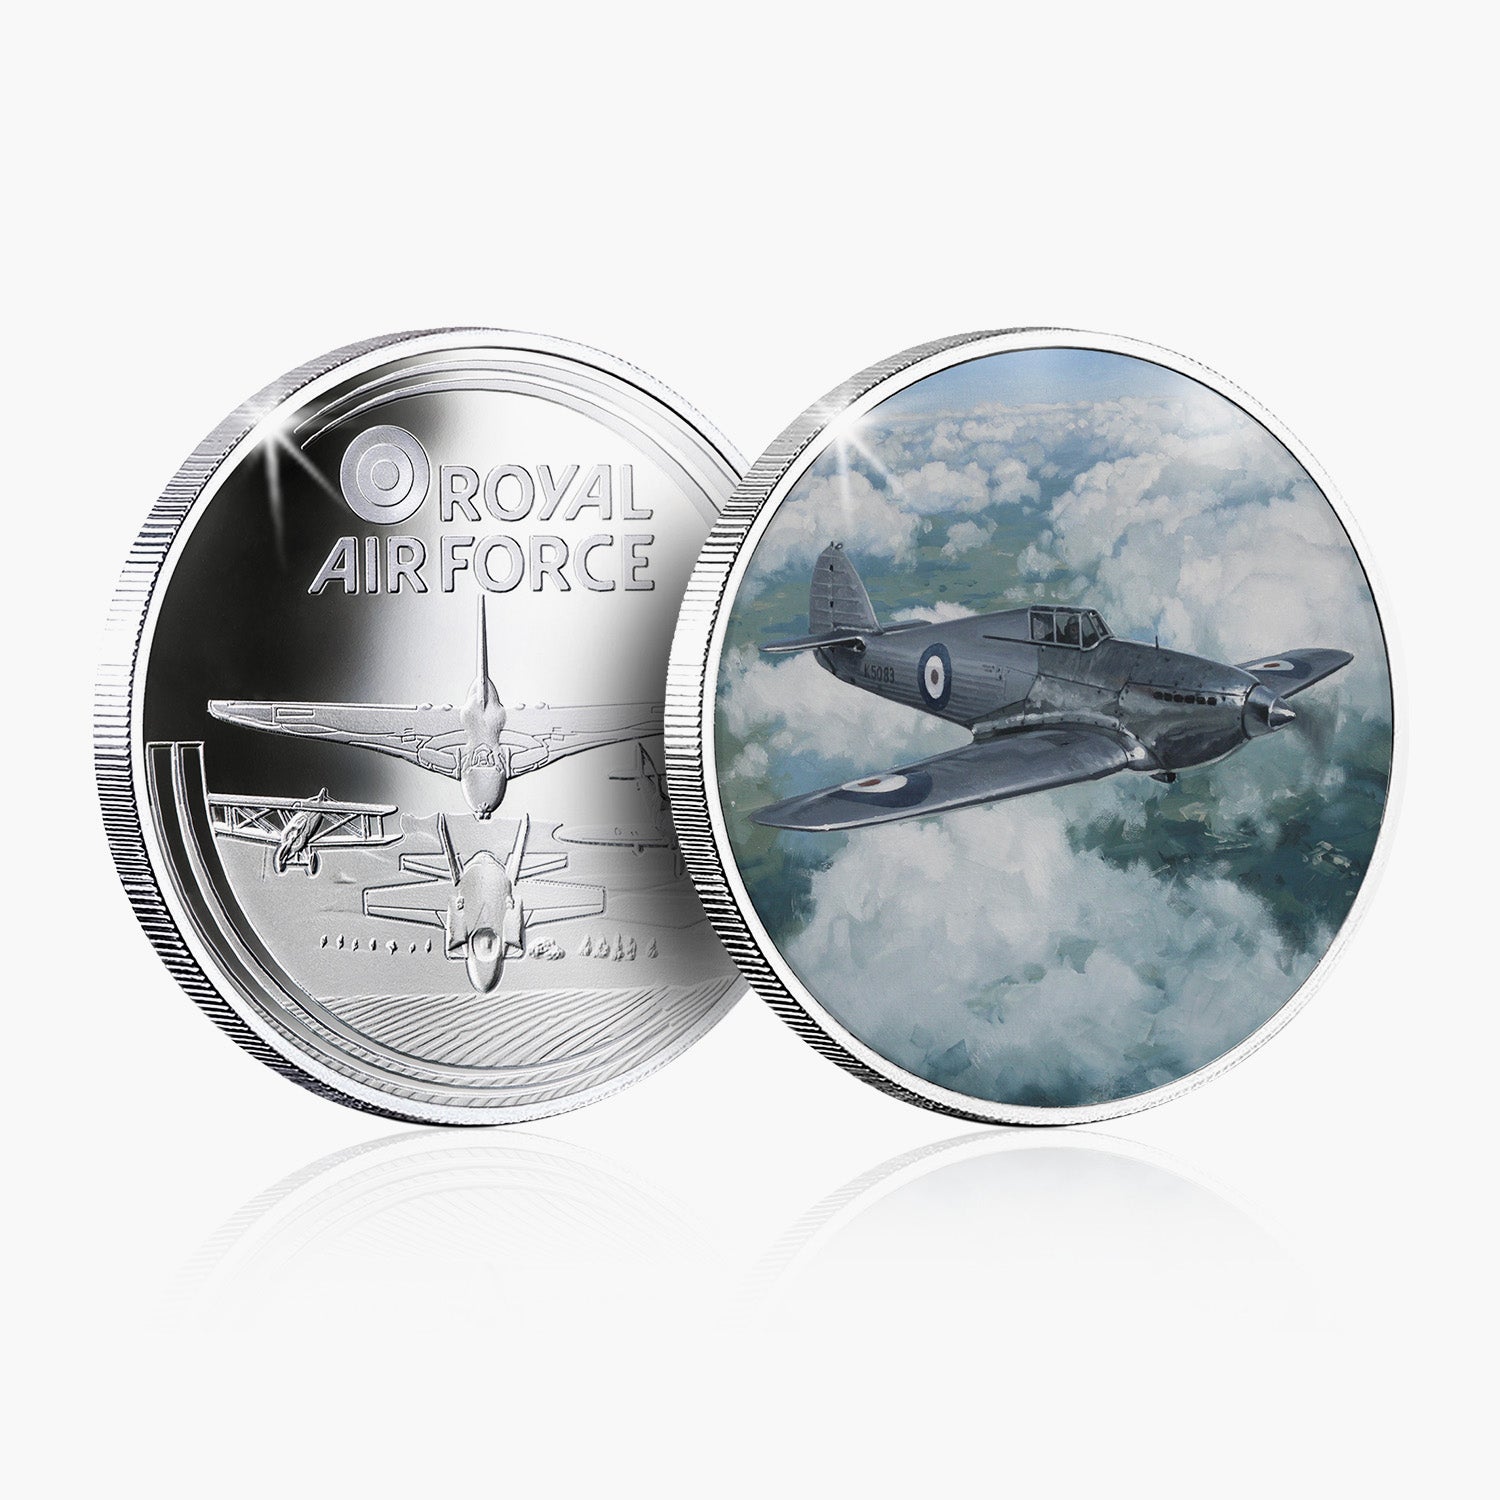 Camm's First Silver-Plated Commemorative